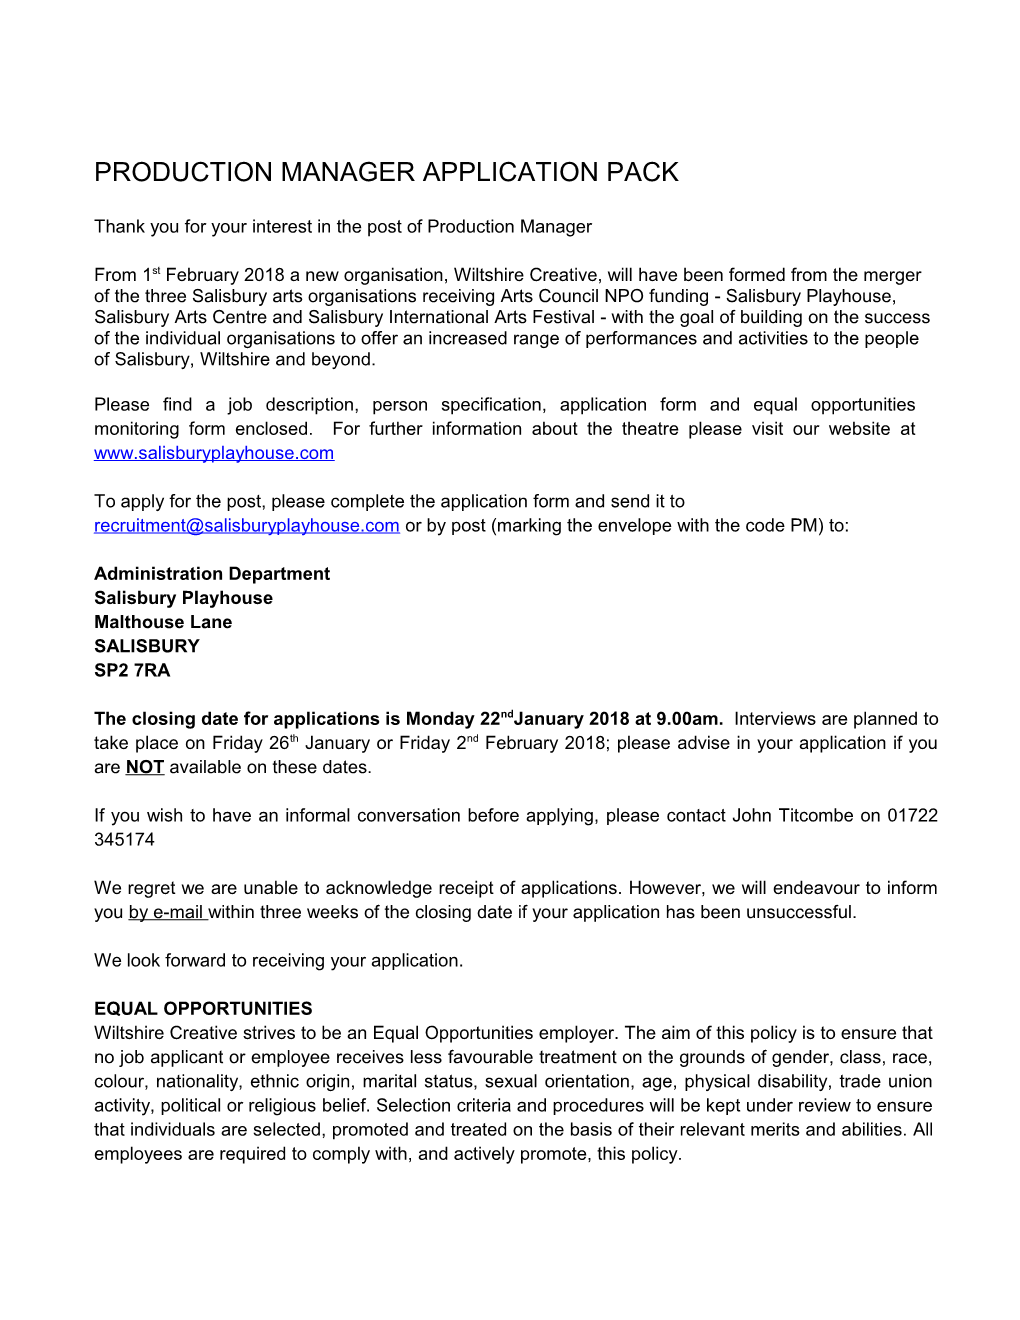 Production Managerapplication Pack